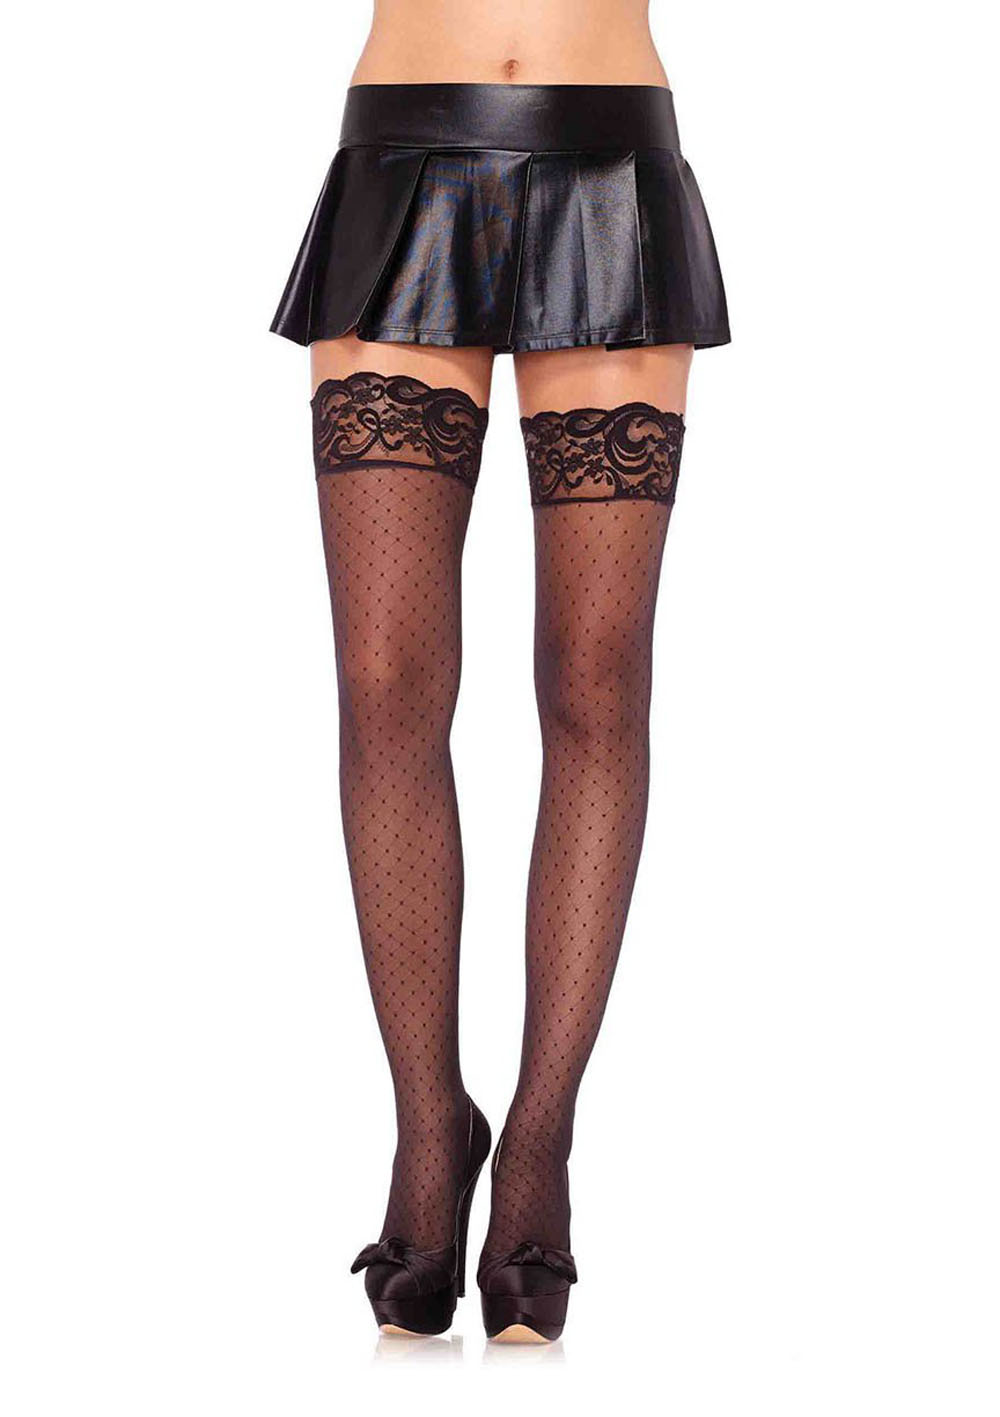 Stay Up Spandex Diamond Dot Sheer Thigh Highs - One Size - Black